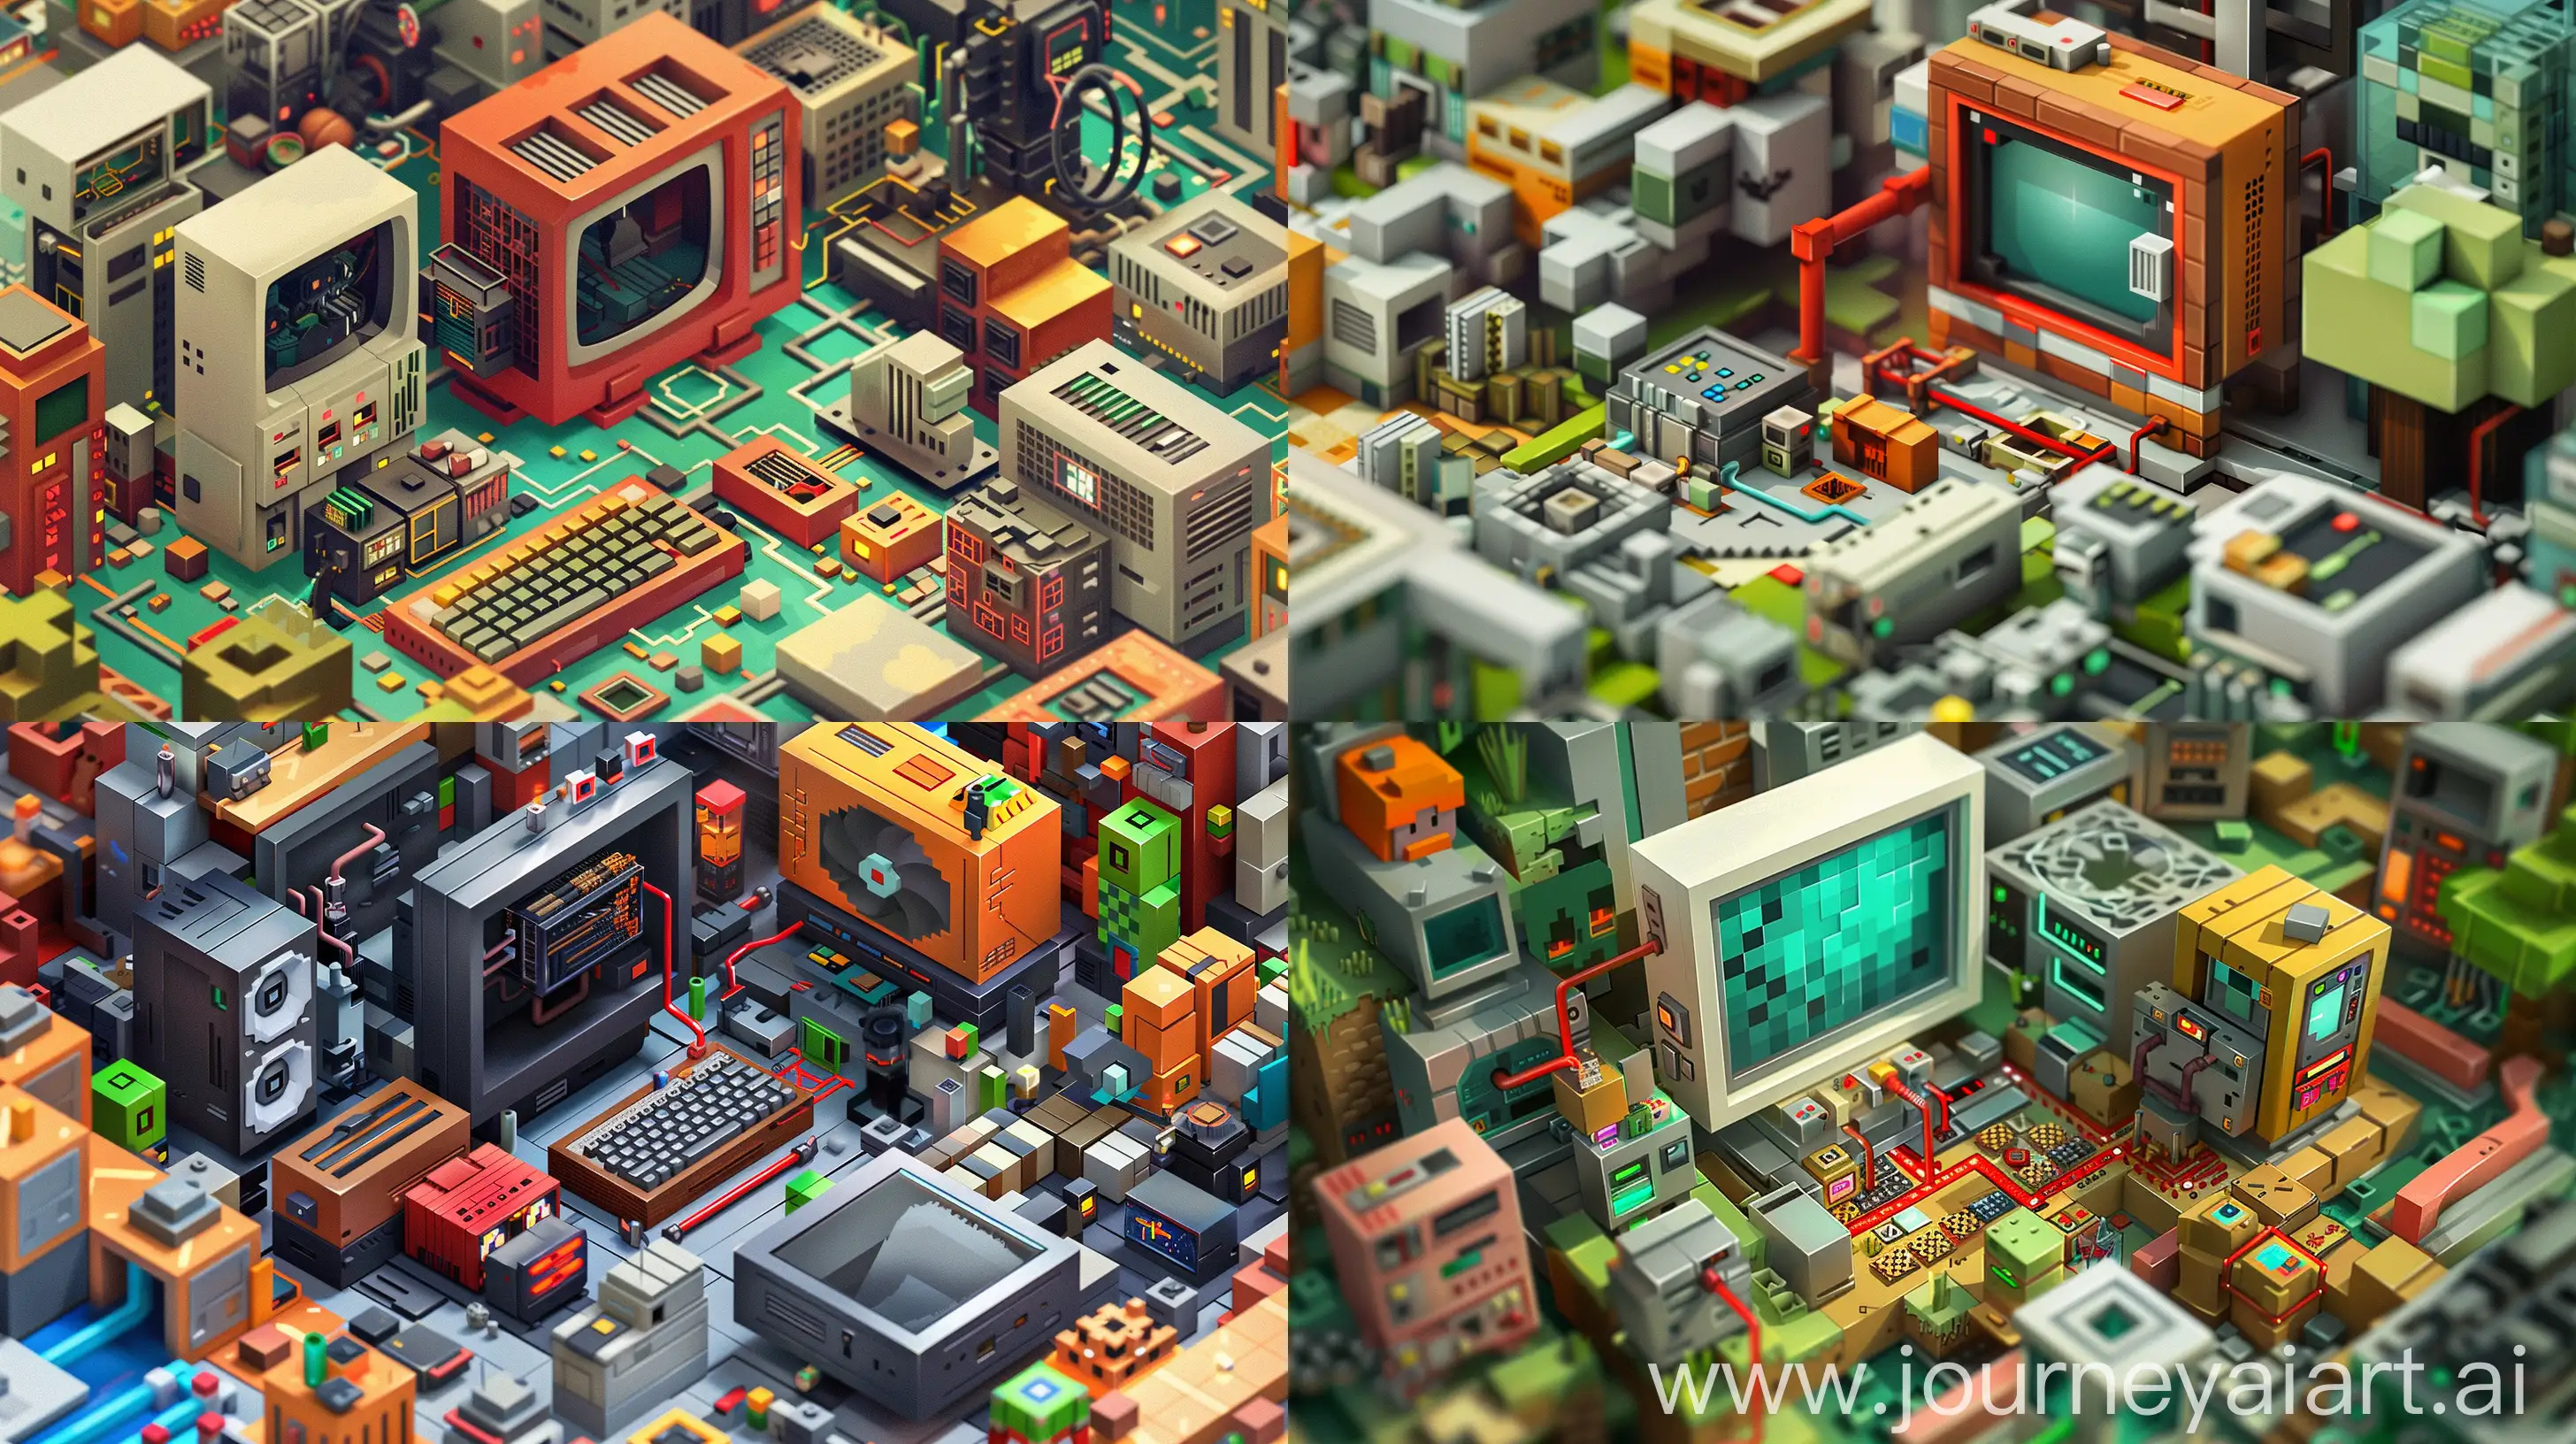 An intricate illustration portraying the process of constructing a computer within the Minecraft game environment. The scene depicts a meticulously crafted world, where the player prepares the gaming realm for building the computer. Various blocks and materials are carefully chosen and arranged for the construction, showcasing the selection process. Redstone components and other mechanical elements are incorporated to add functionality to the computer. The composition emphasizes the intricate details of the Minecraft world, with vibrant colors and textures enhancing the immersive experience. --ar 16:9 